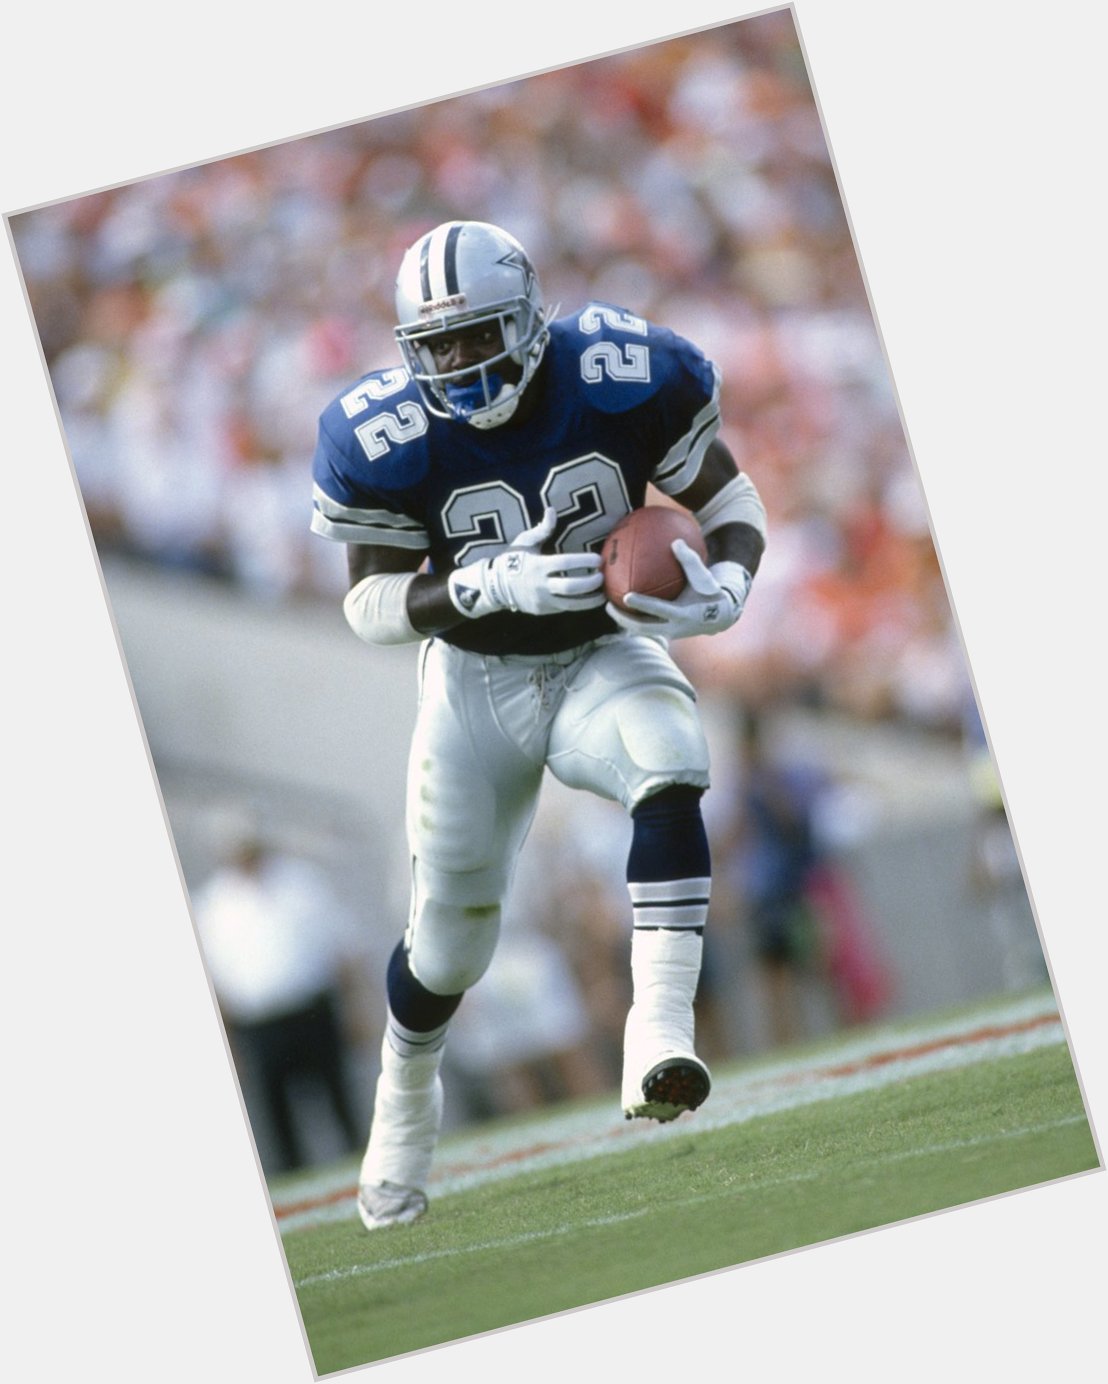 One of the best running backs in the history of the game. 

Happy Birthday Emmitt Smith! 